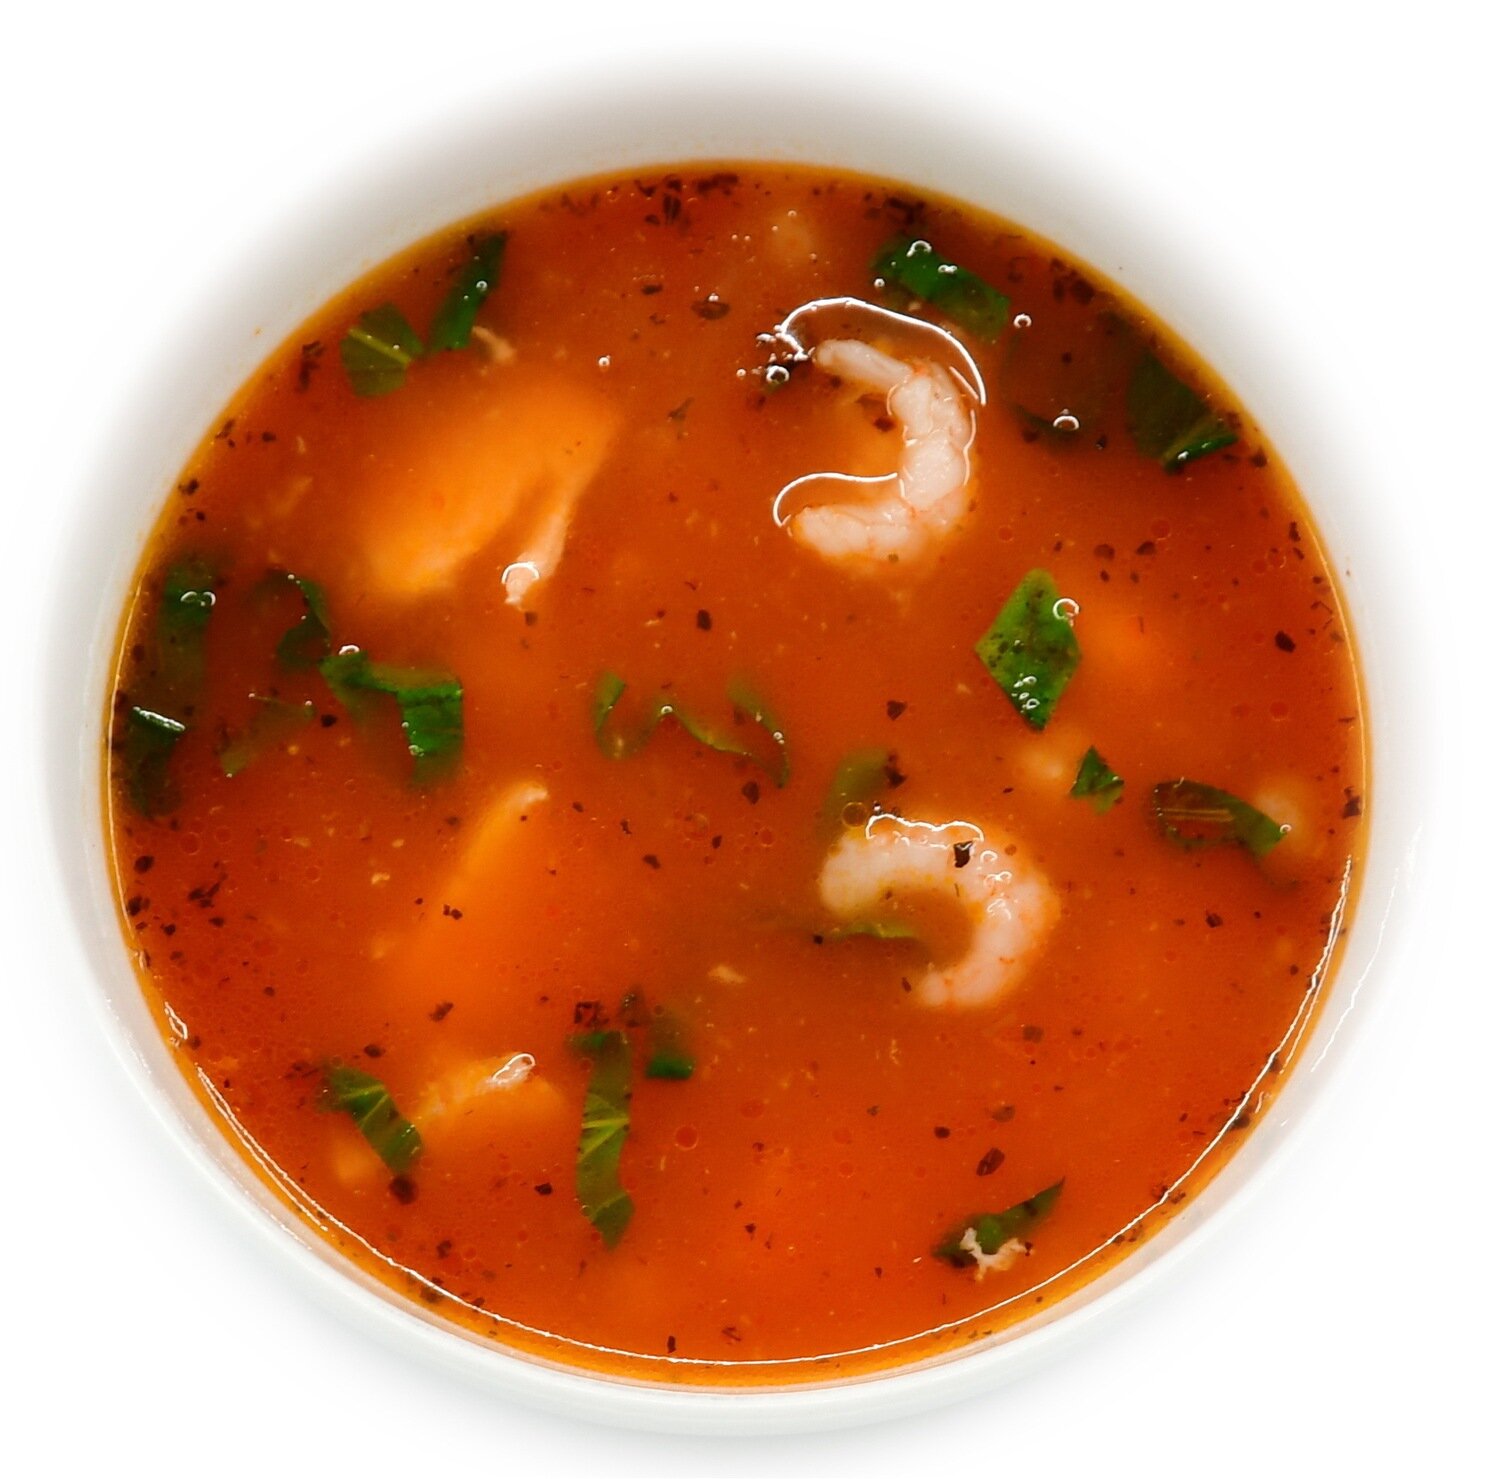 Salmon-shrimp soup with couscous in wine-tomato broth